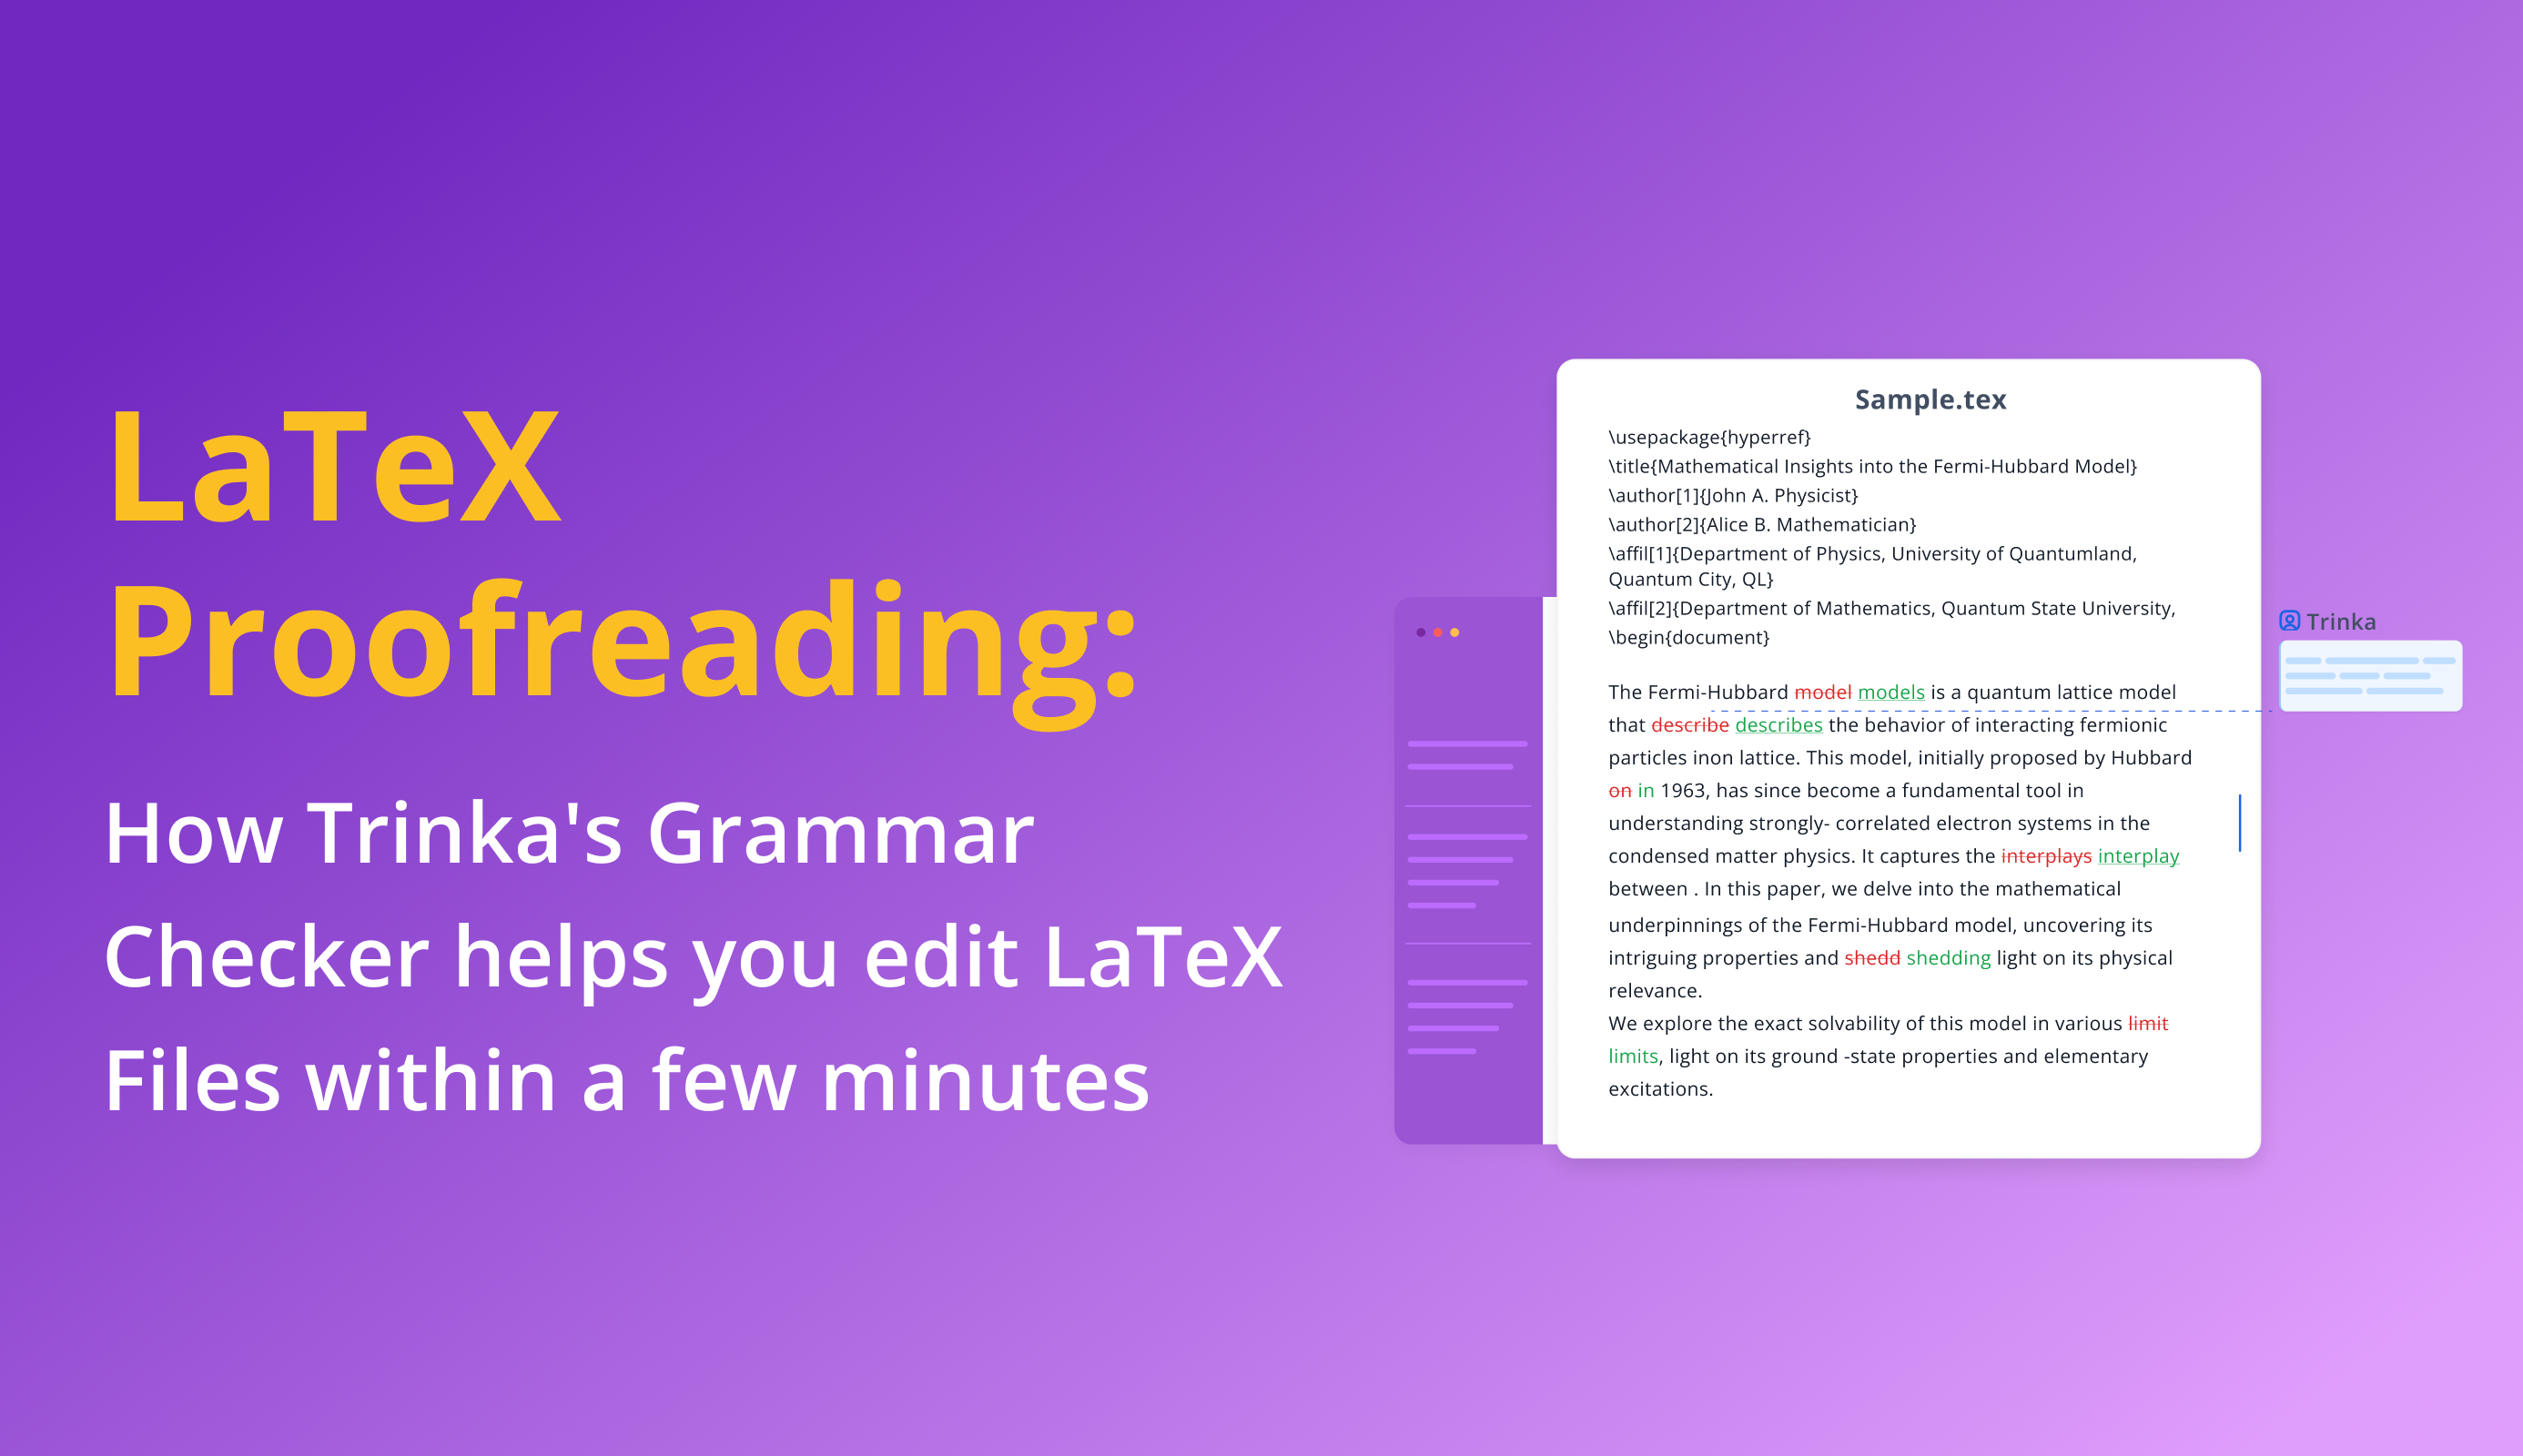 LaTeX Proofreading: How Trinka’s Grammar Checker helps you edit LaTeX Files within a few minutes!